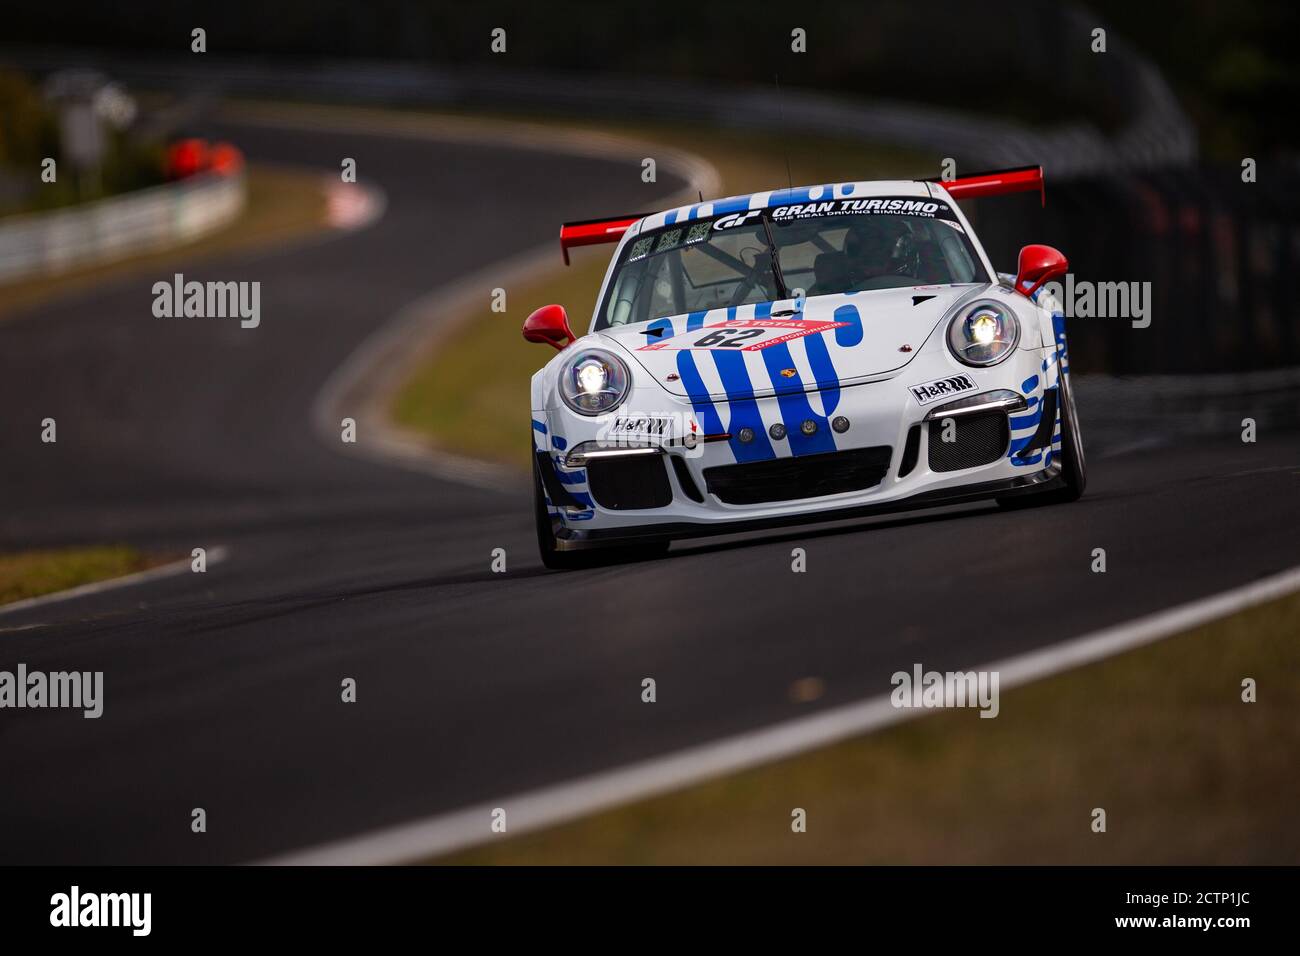 62 Cameron Bill (gbr), Cameron Jim (swe), Bon Ralf-Peter (swe), Klasen Arno (ger), Porsche 911 GT3 Cup, action during the 2020 24 Hours of Nurburgring, on the N.rburgring Nordschleife, from September 24 to 27, 2020 in Nurburg, Germany - Photo Joao Filipe / DPPI Credit: LM/DPPI/Joao Filipe/Alamy Live News Stock Photo